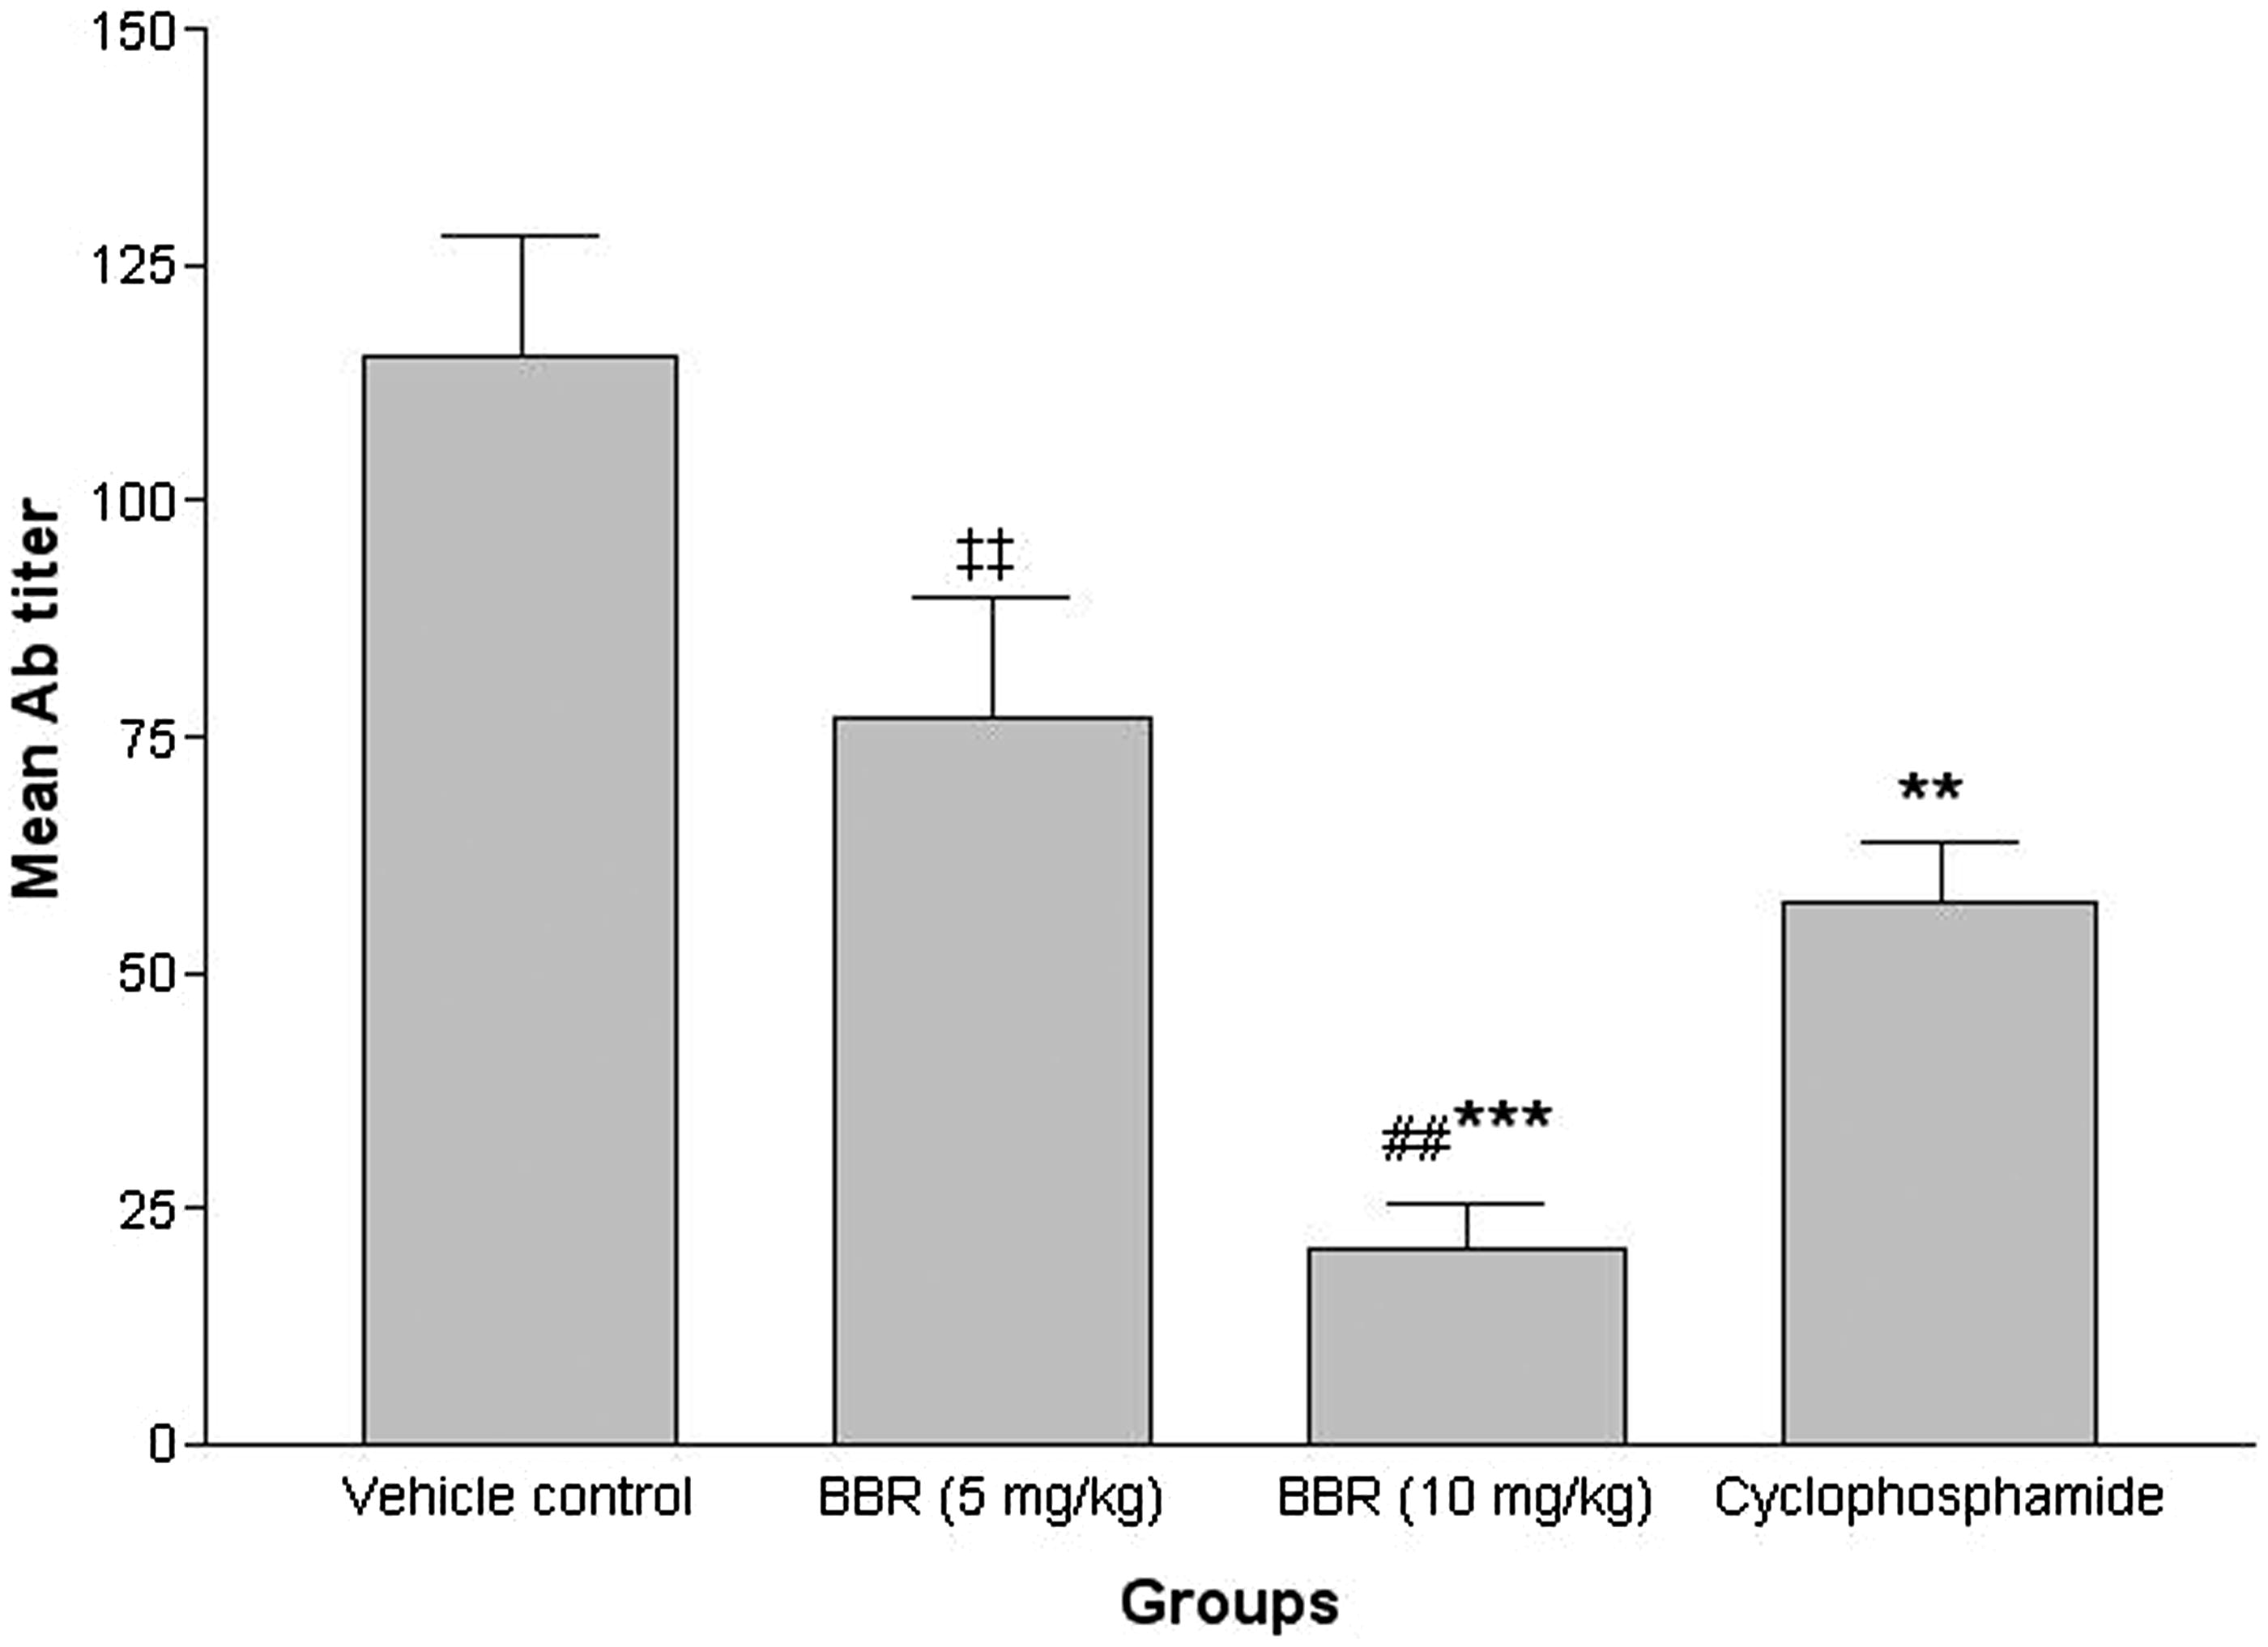 Figure 3. Effects of subacute berberine (BBR, 14 days) exposure on mouse antibody response. Levels of anti-SRBC produced in serum harvested from mice 24 h after the final treatment (on Day 15) in indicated regimens. Values shown are mean ± SE (n = 6/group). Value significantly different from vehicle control mice (**p < 0.01 or ***p < 0.001); ##Significantly different versus positive control (CYP) (p < 0.01); or ‡‡significantly different as a function of BBR dose (p < 0.01).